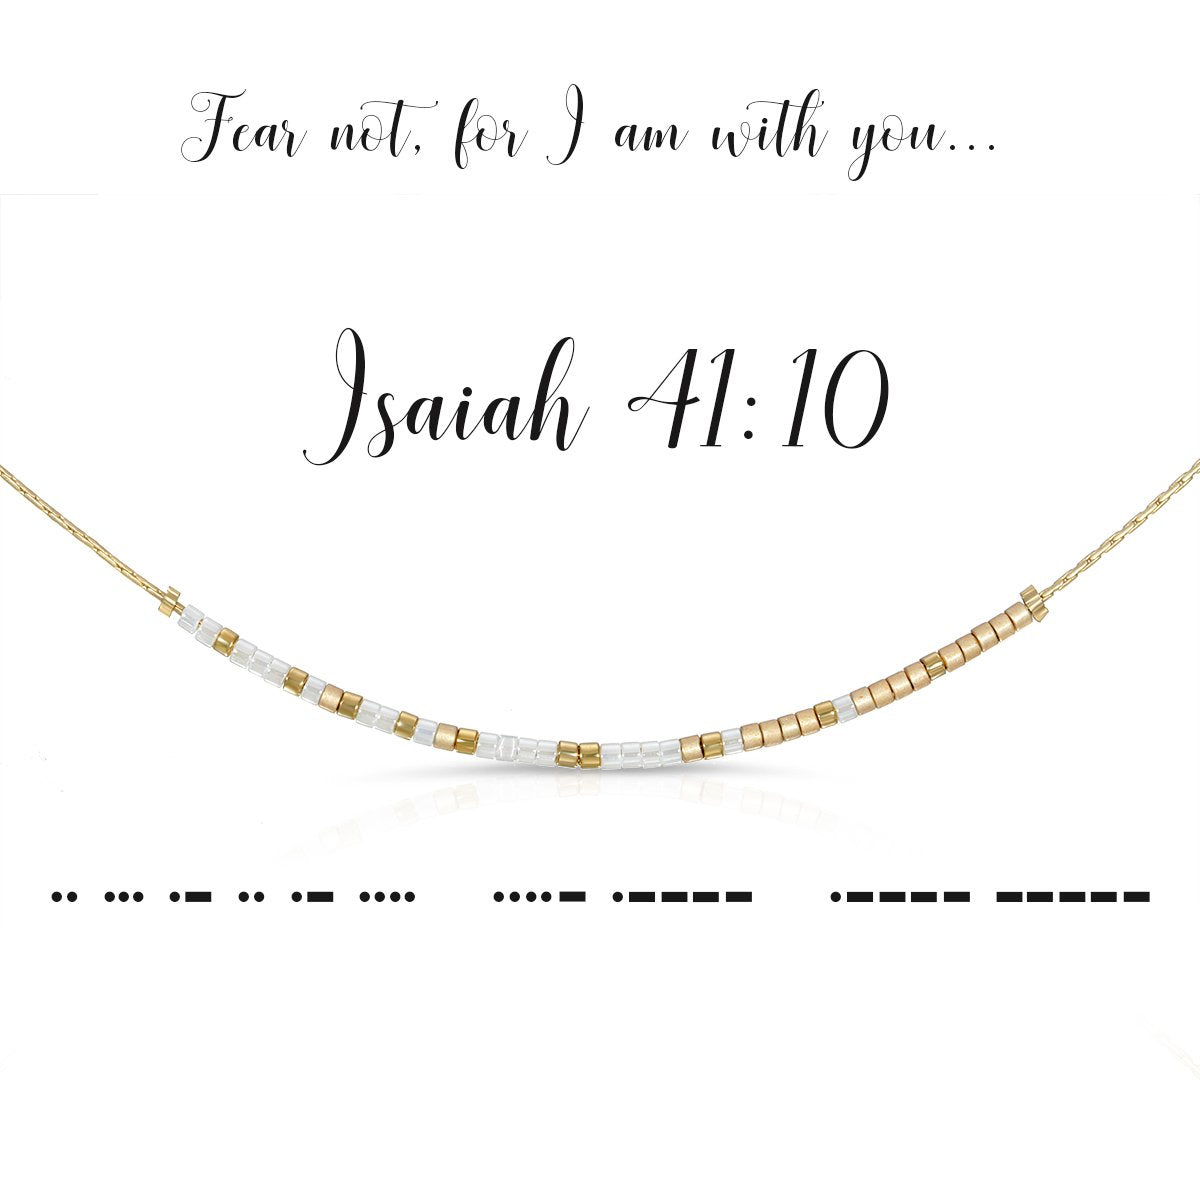 Peace Be With You Morse Code Necklace - Modern Faith Based Jewelry